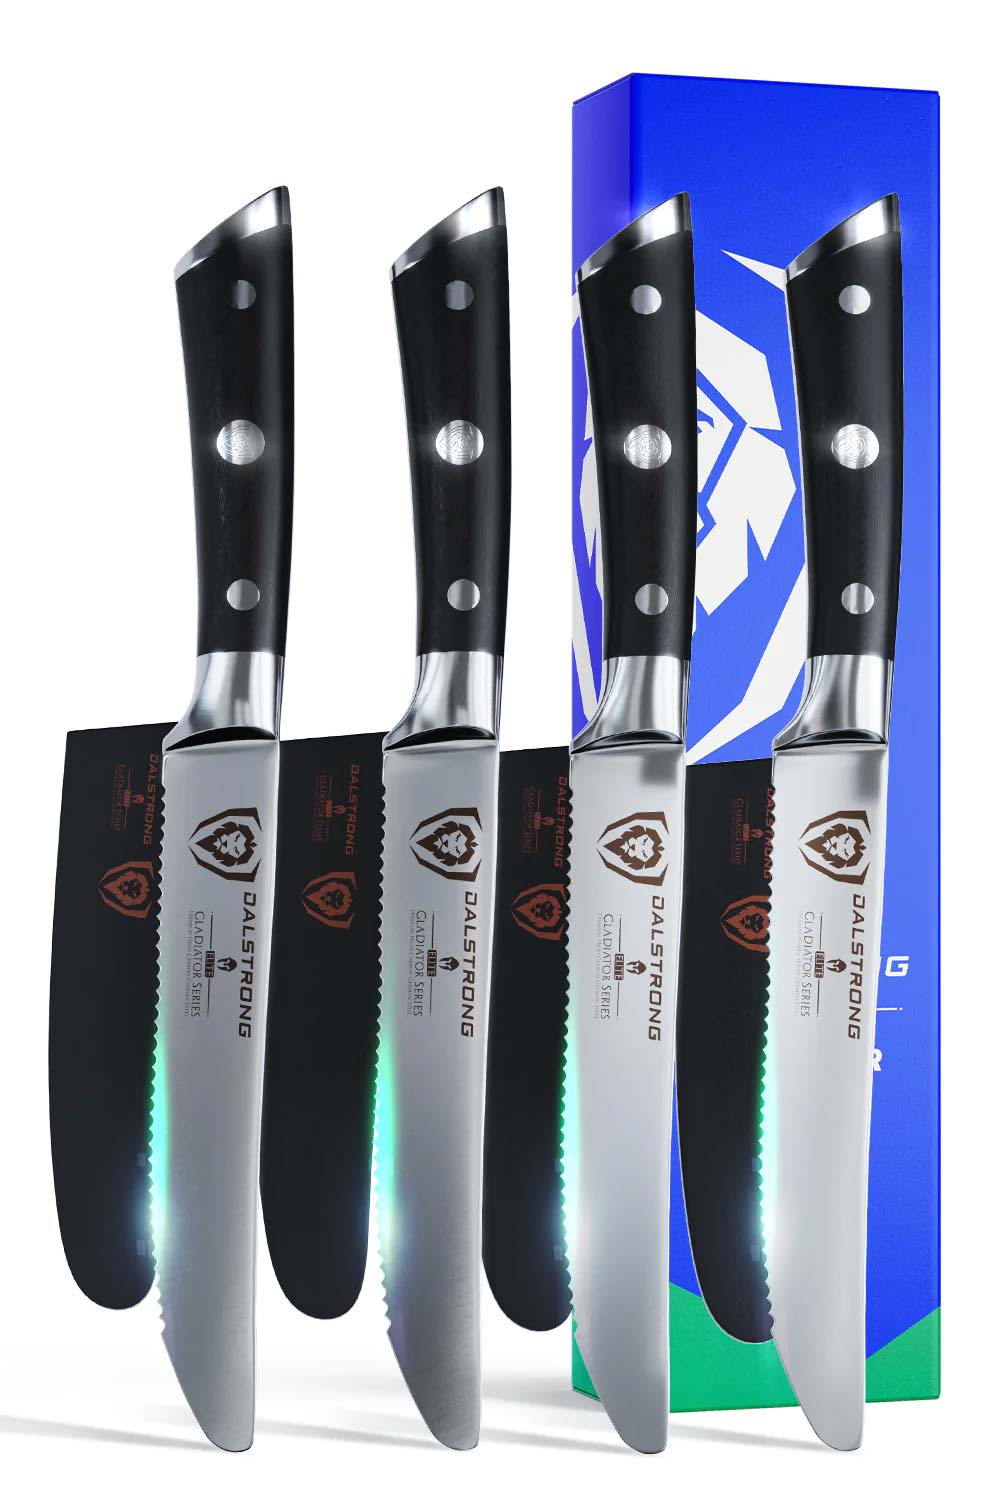 Dalstrong gladiator series 5 inch serrated steak knife with black handles in front of it's premium packaging.